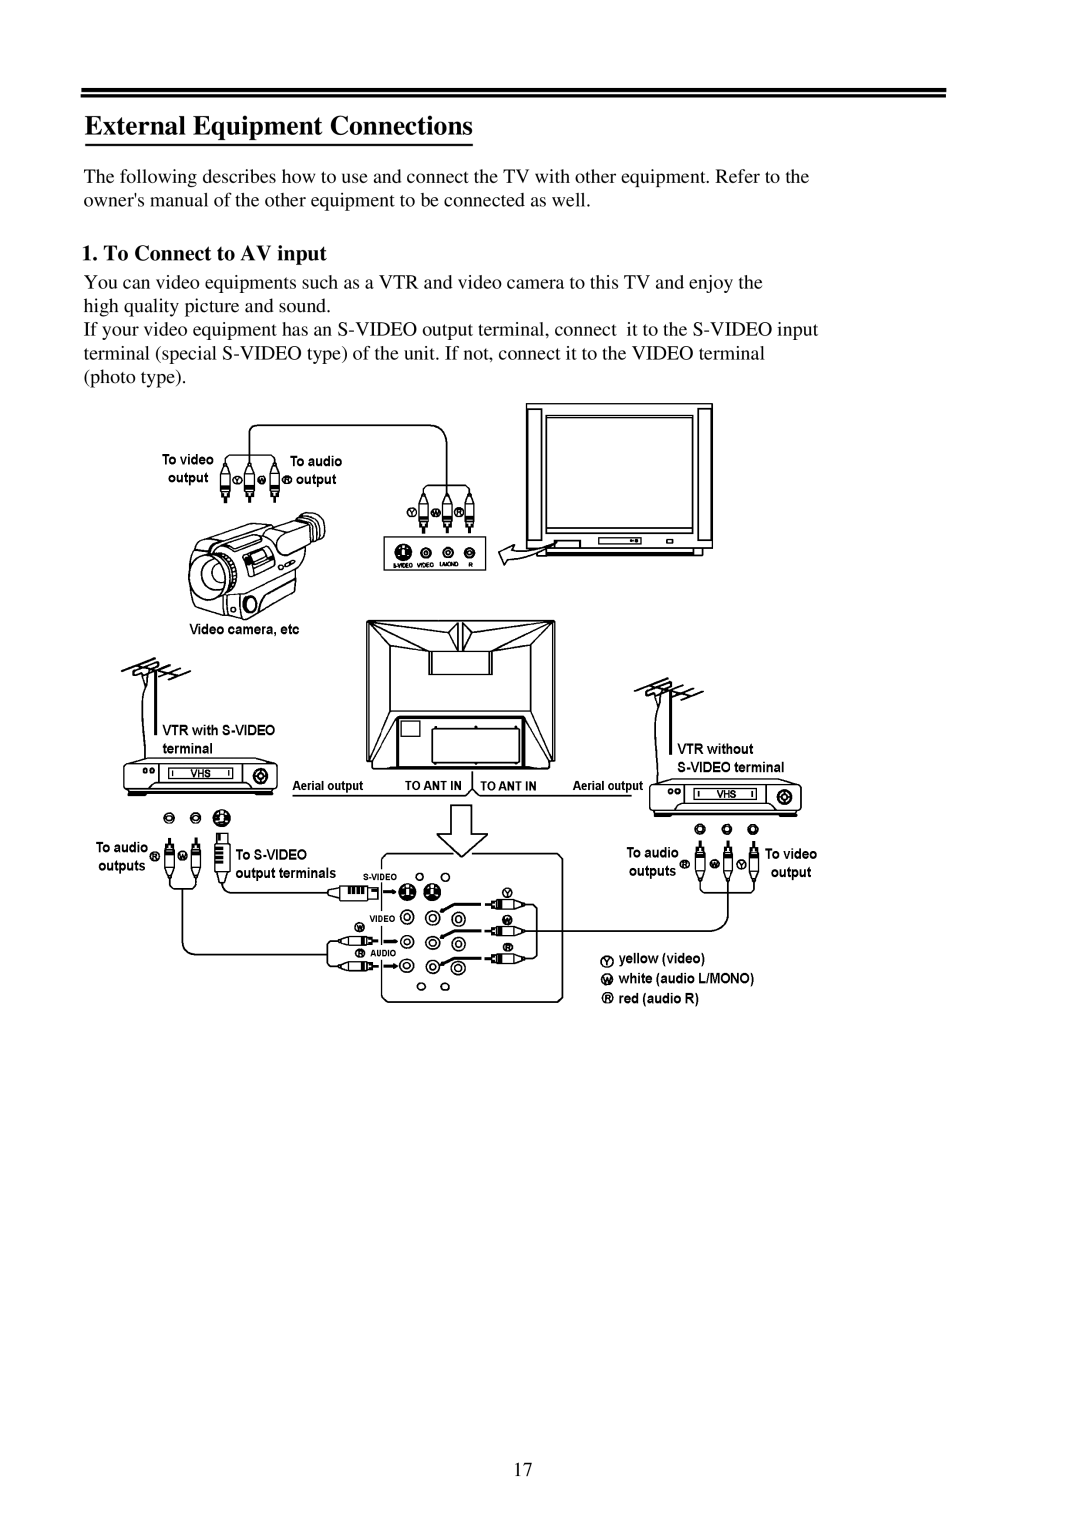 Palsonic 8010PF owner manual External Equipment Connections, To Connect to AV input 